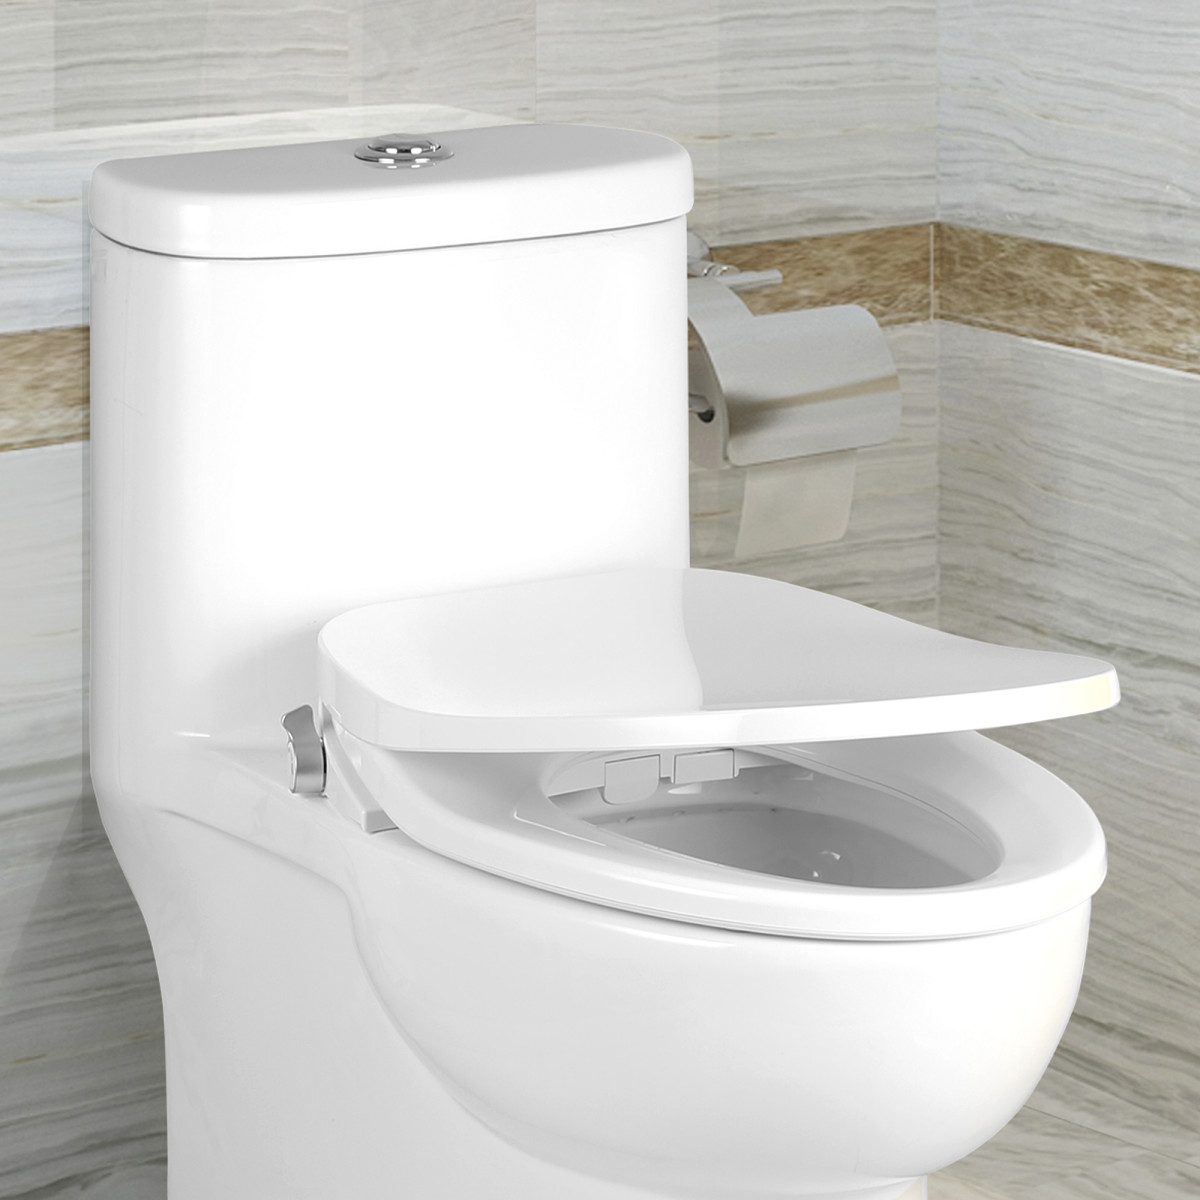 Is a Bidet the Perfect Gift? (Yes. The Answer's Yes.) - Men's